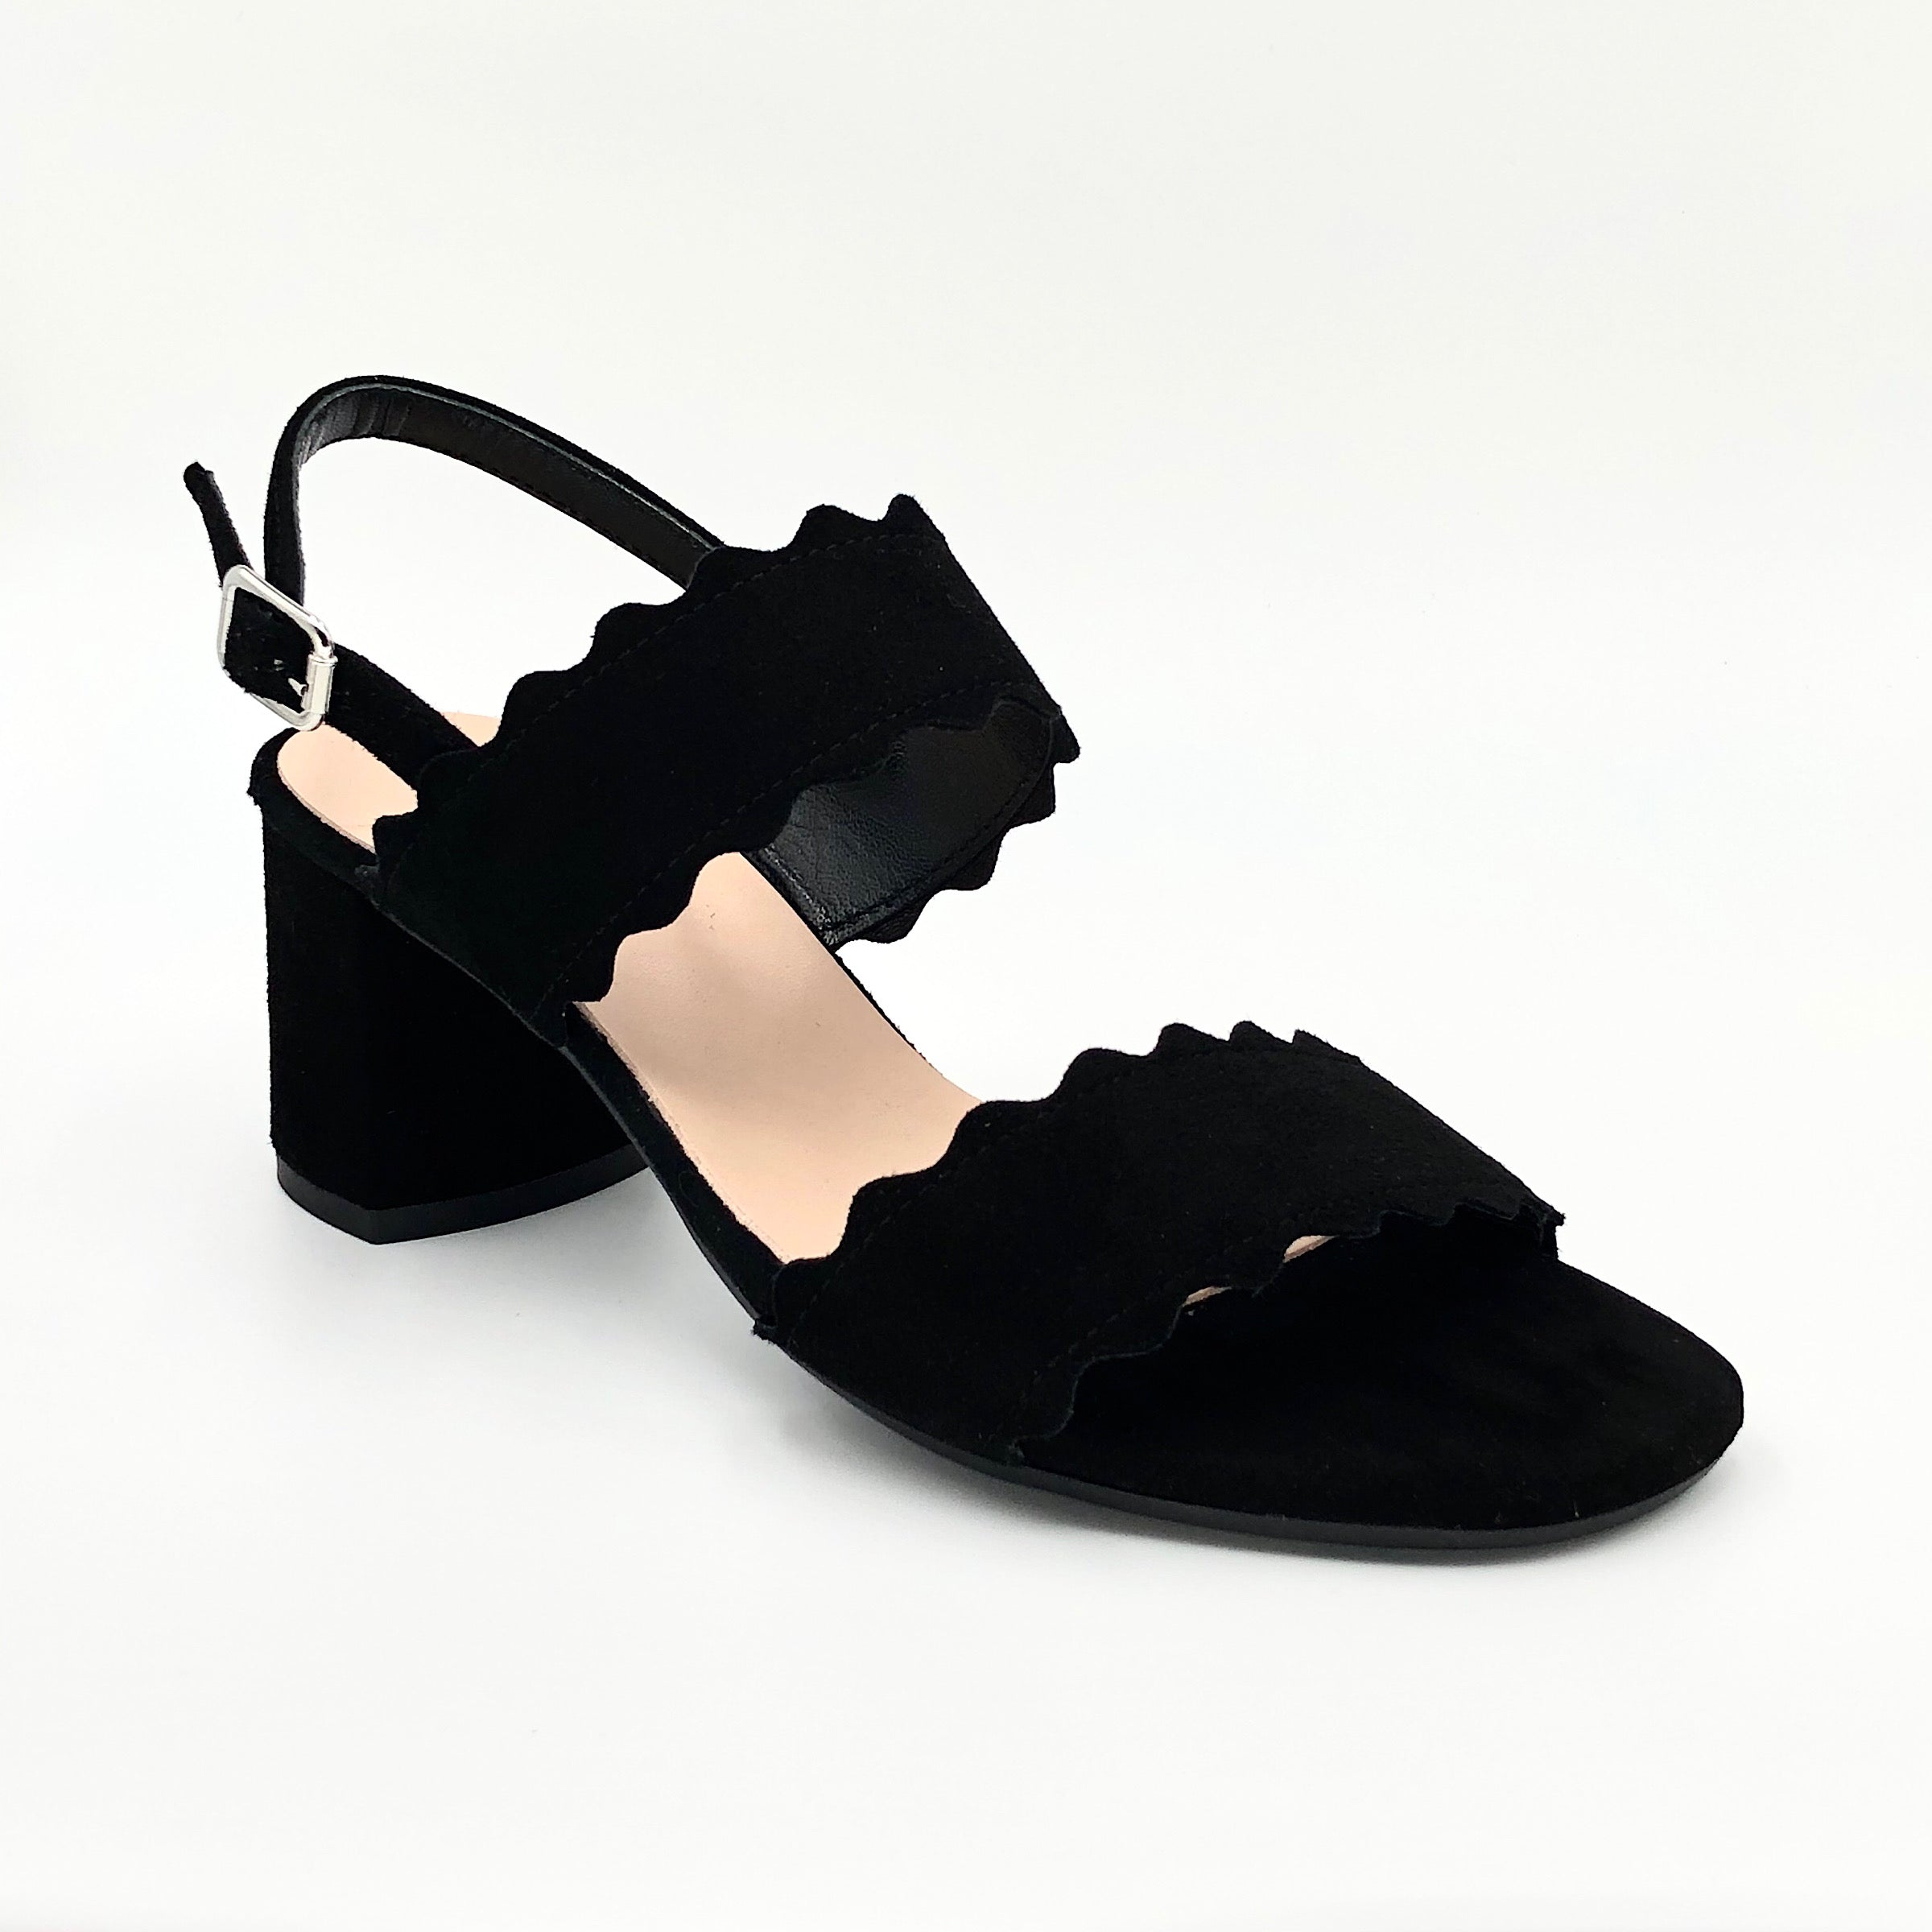 Scallop 2 - The Perfect Sandal in Black